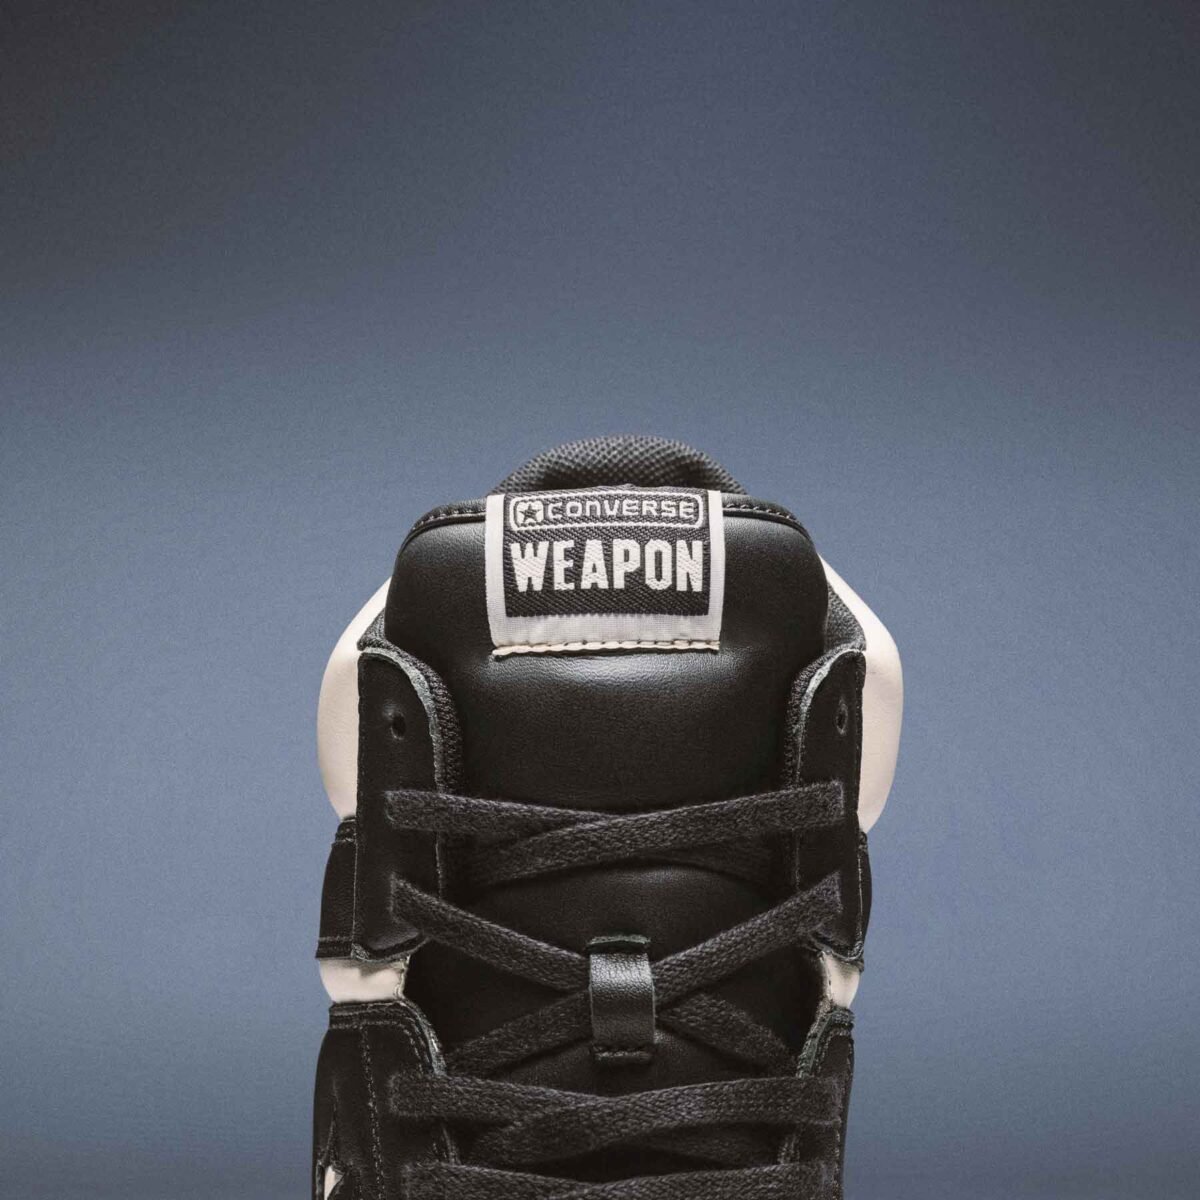 Converse Weapon